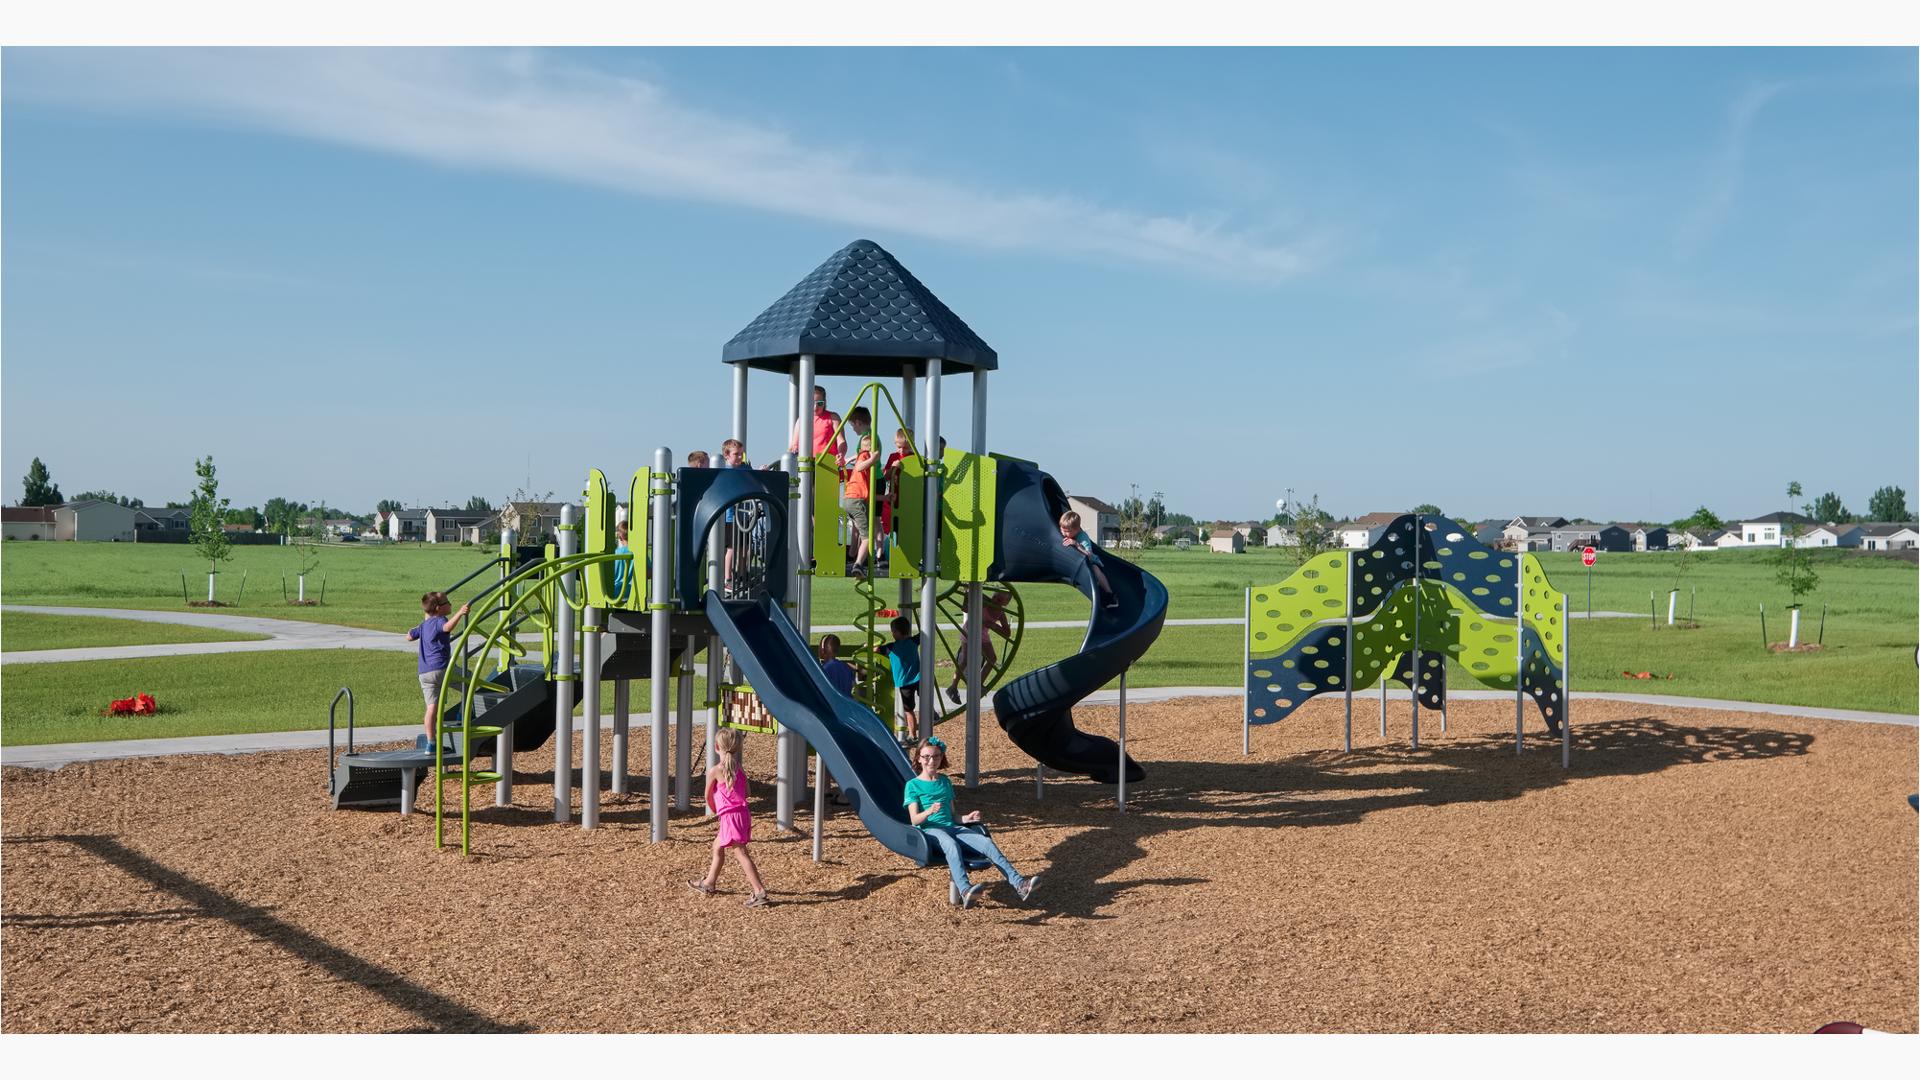 Legacy Park, Fargo, ND features a PlayBooster®  play structure for ages 5 to 12 with a variety of climbers and slides galore. The PlayShaper® play structure is sized right for ages 2 to 5, with slides, climbers and more. As well as a Cascade Climber.